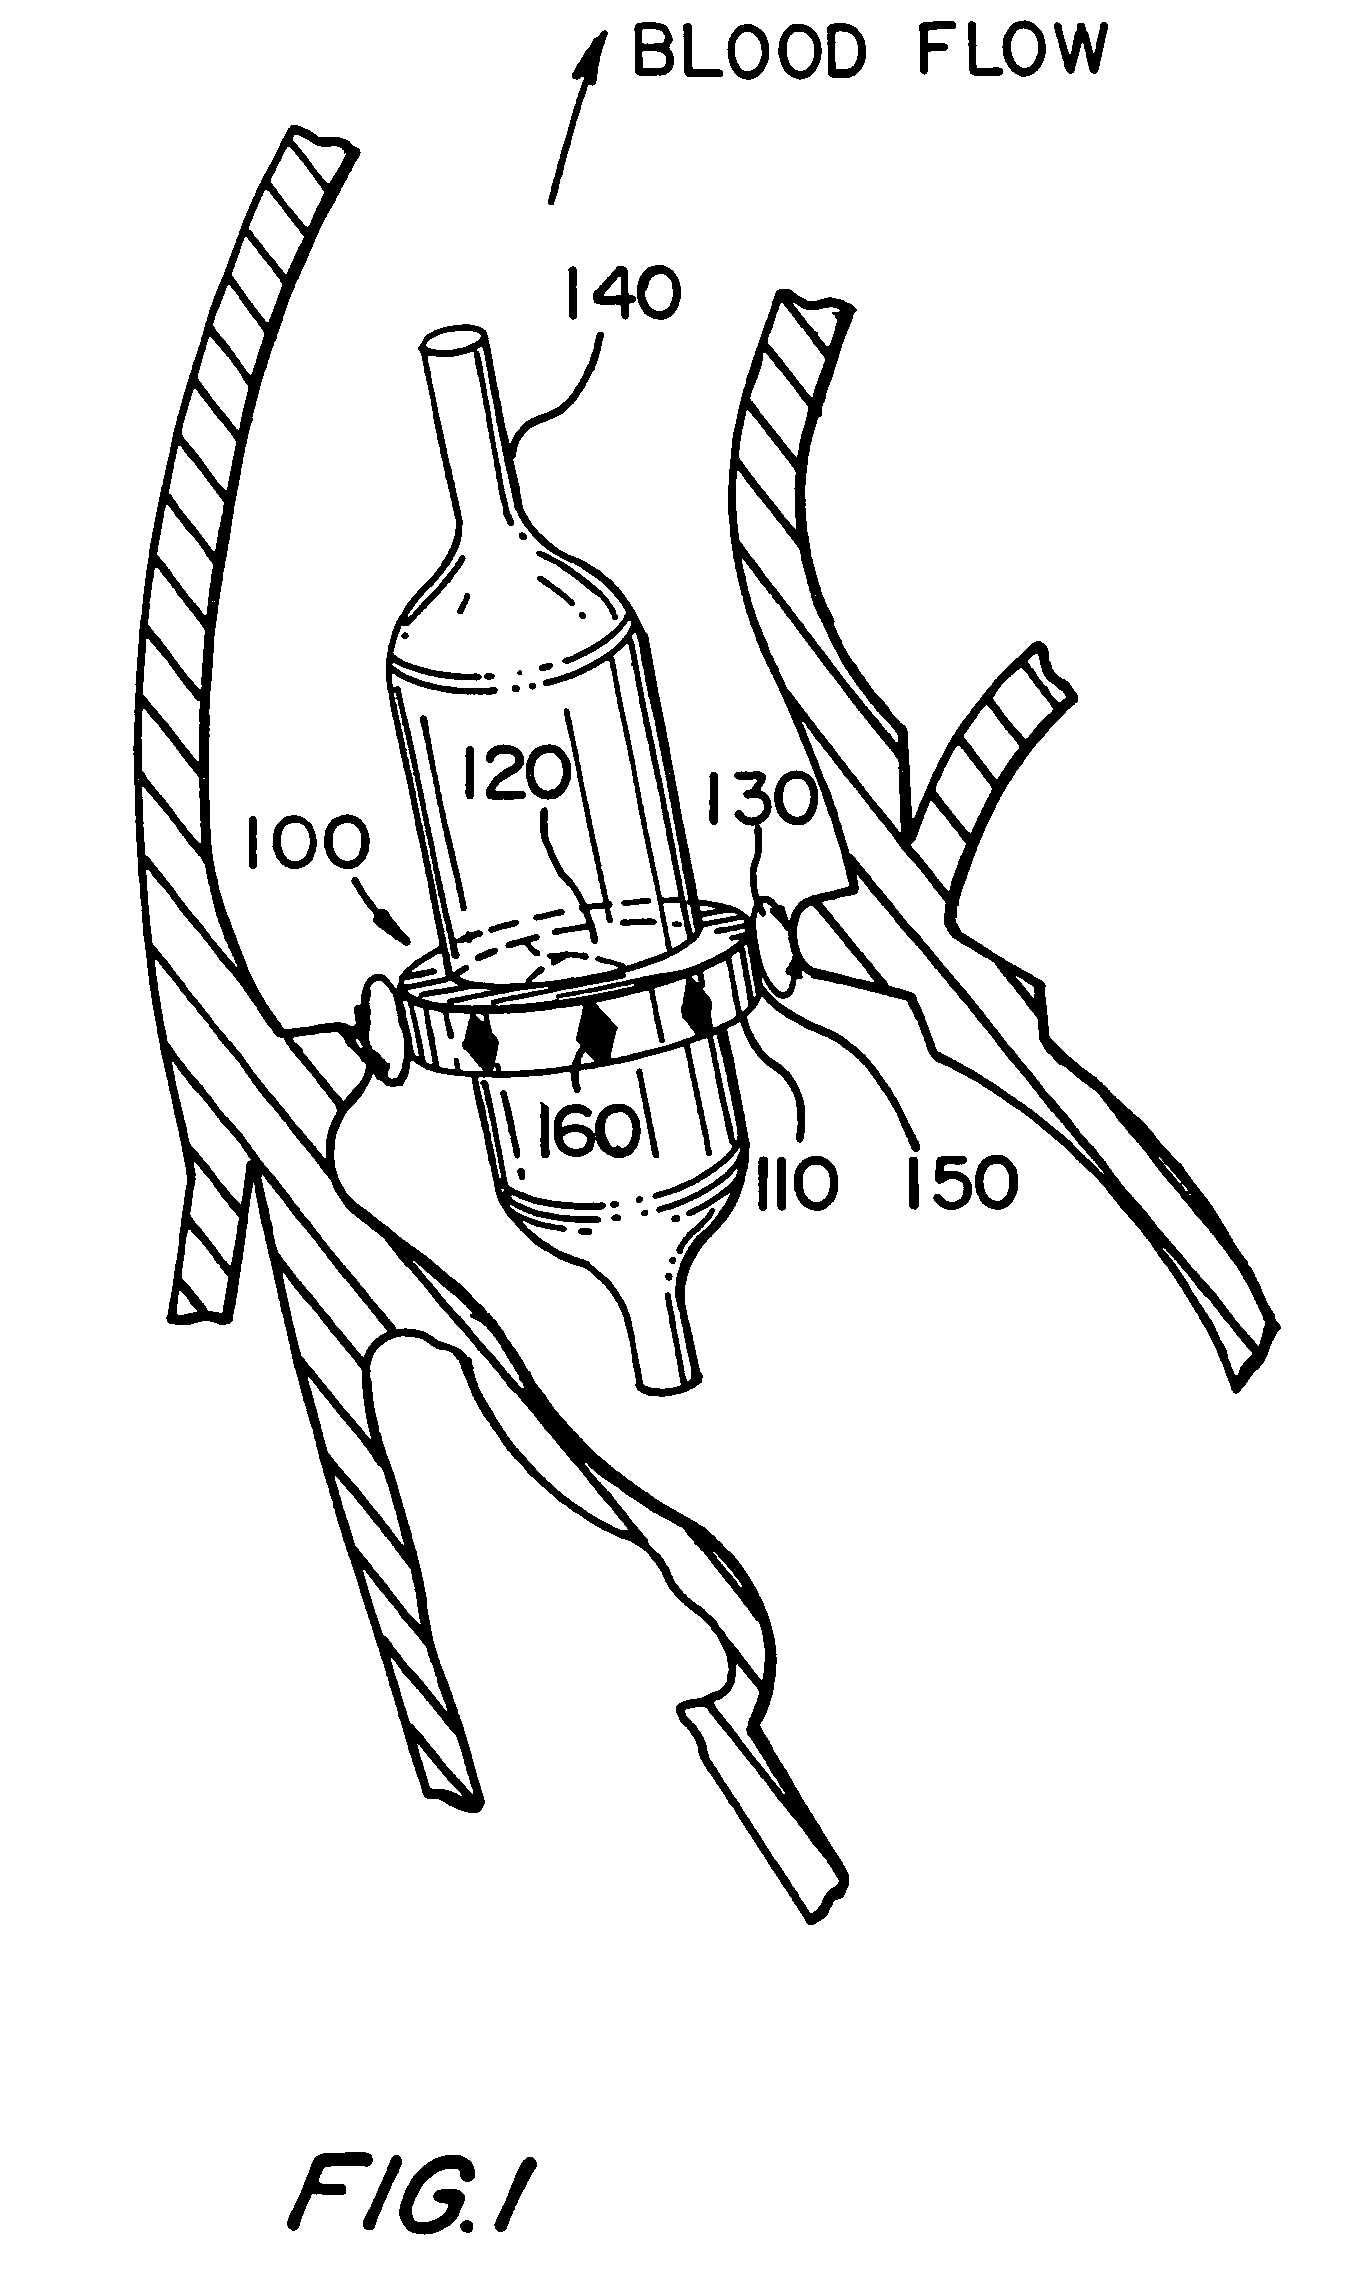 Artificial heart valve attachment apparatus and methods